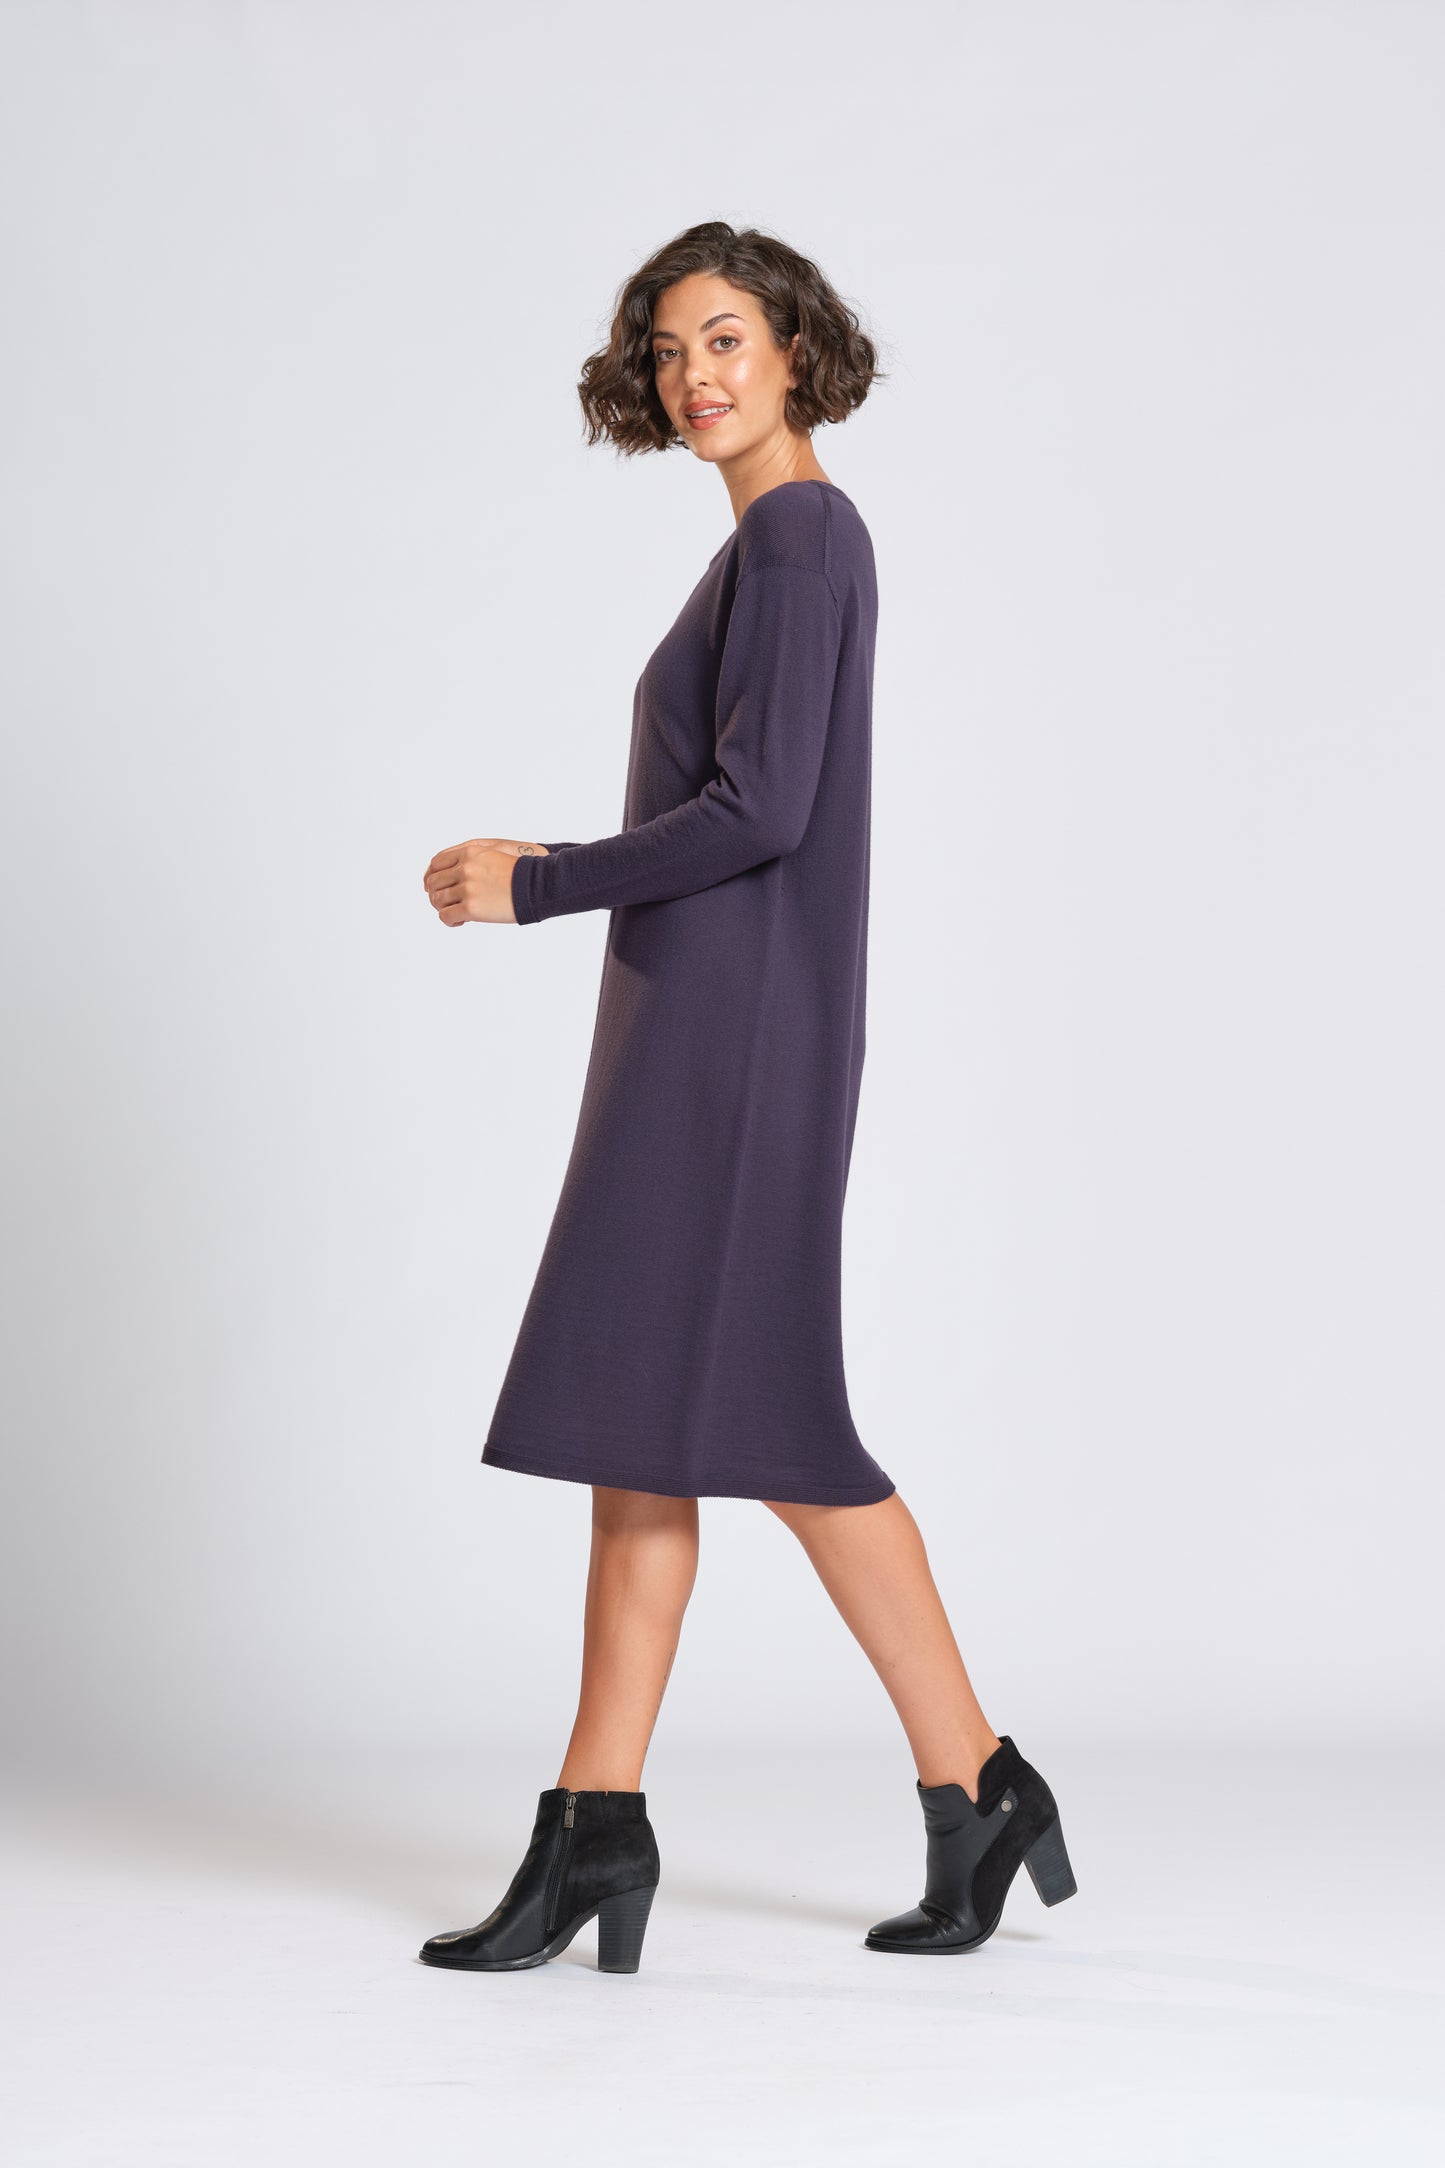 OPTM 6874 Round Neck Easy Fit Dress